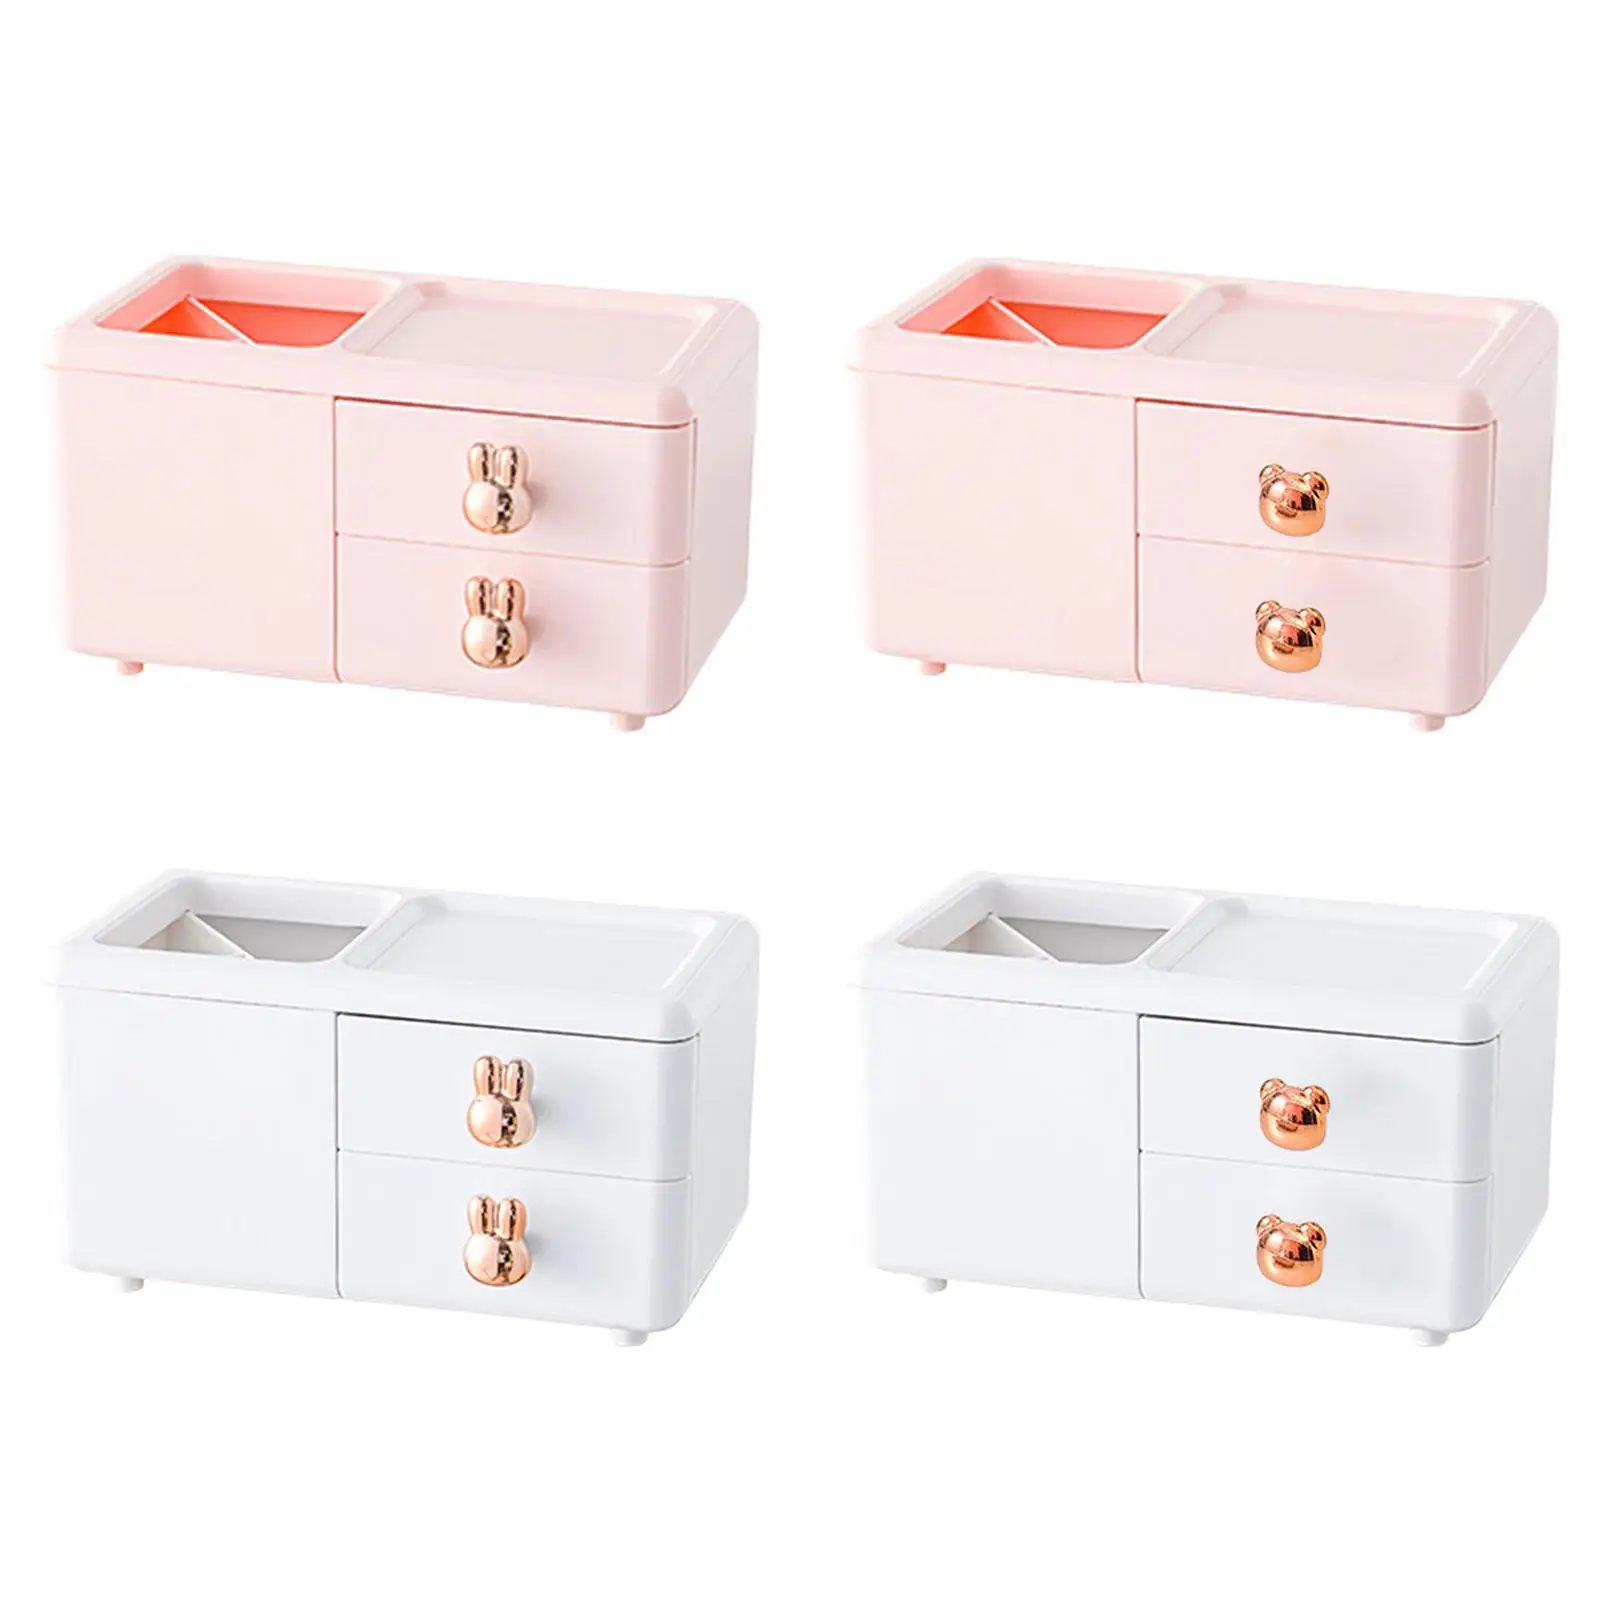 Office Desk Organizer with Drawer Copmact DIY Home Decoration Tidy Storage Box for Dormitory Dressers School Classroom Apartment